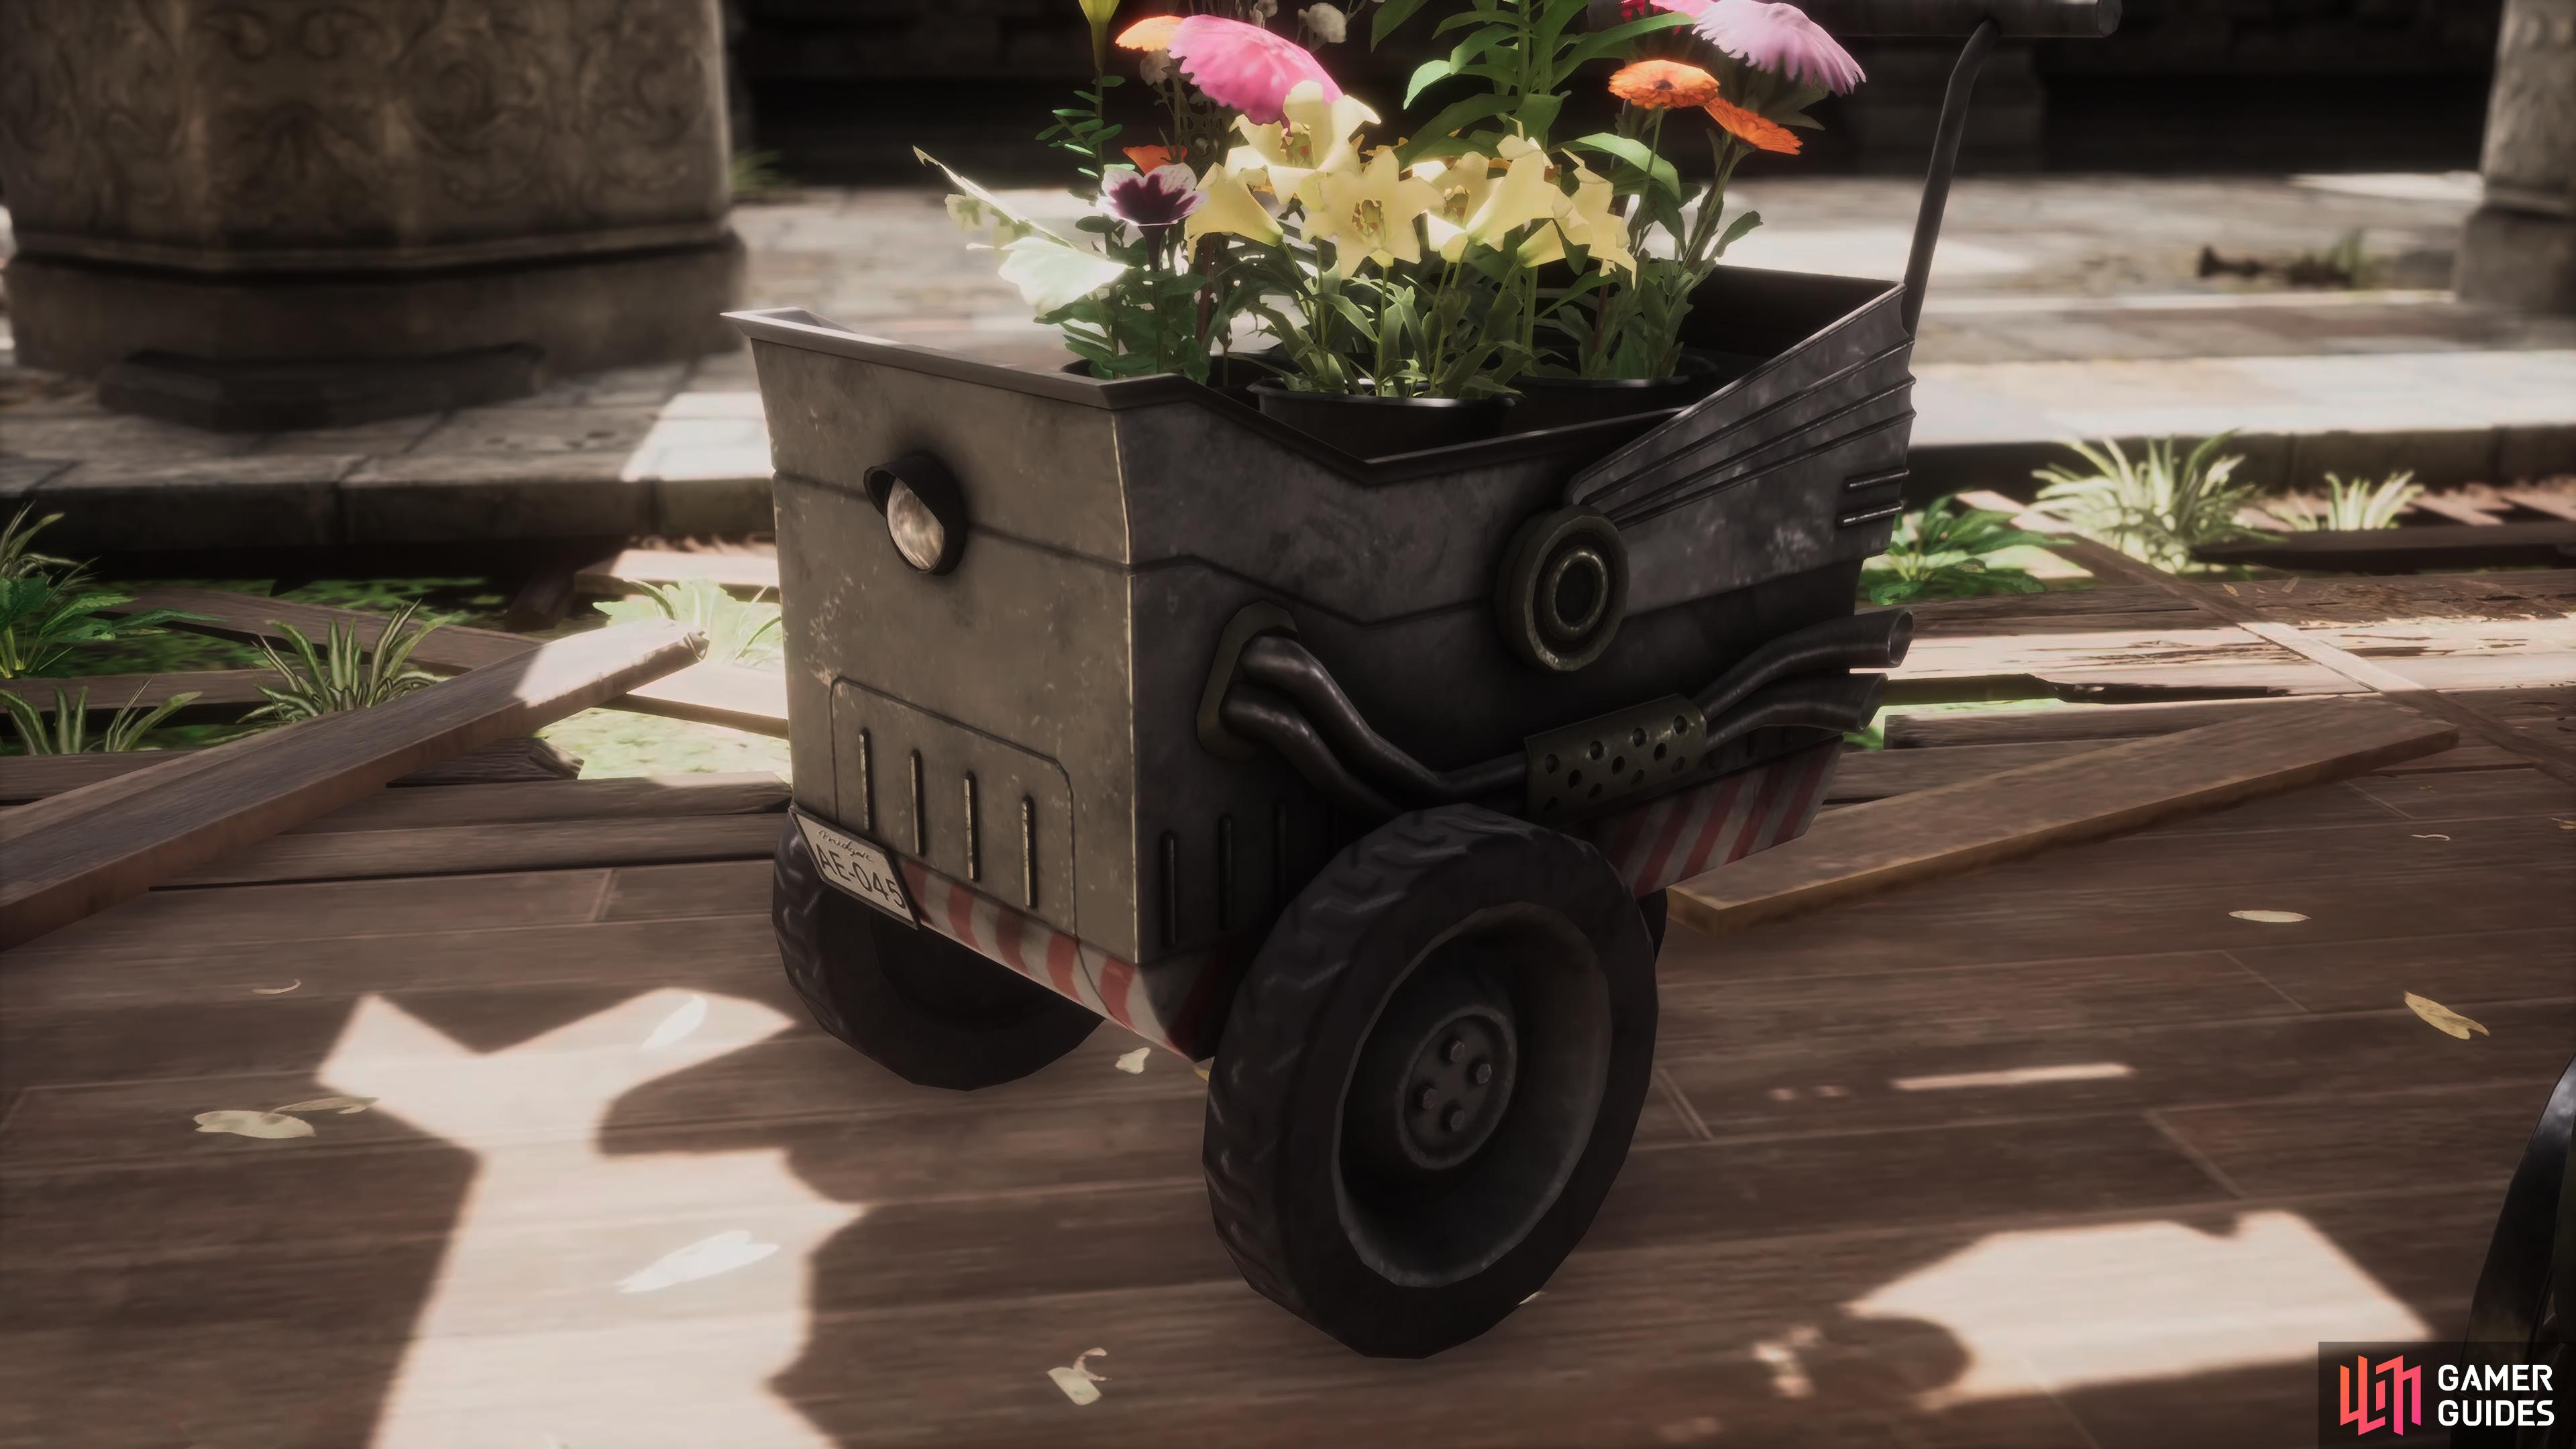 The third wagon looks more like a weapon than a Flower Cart.